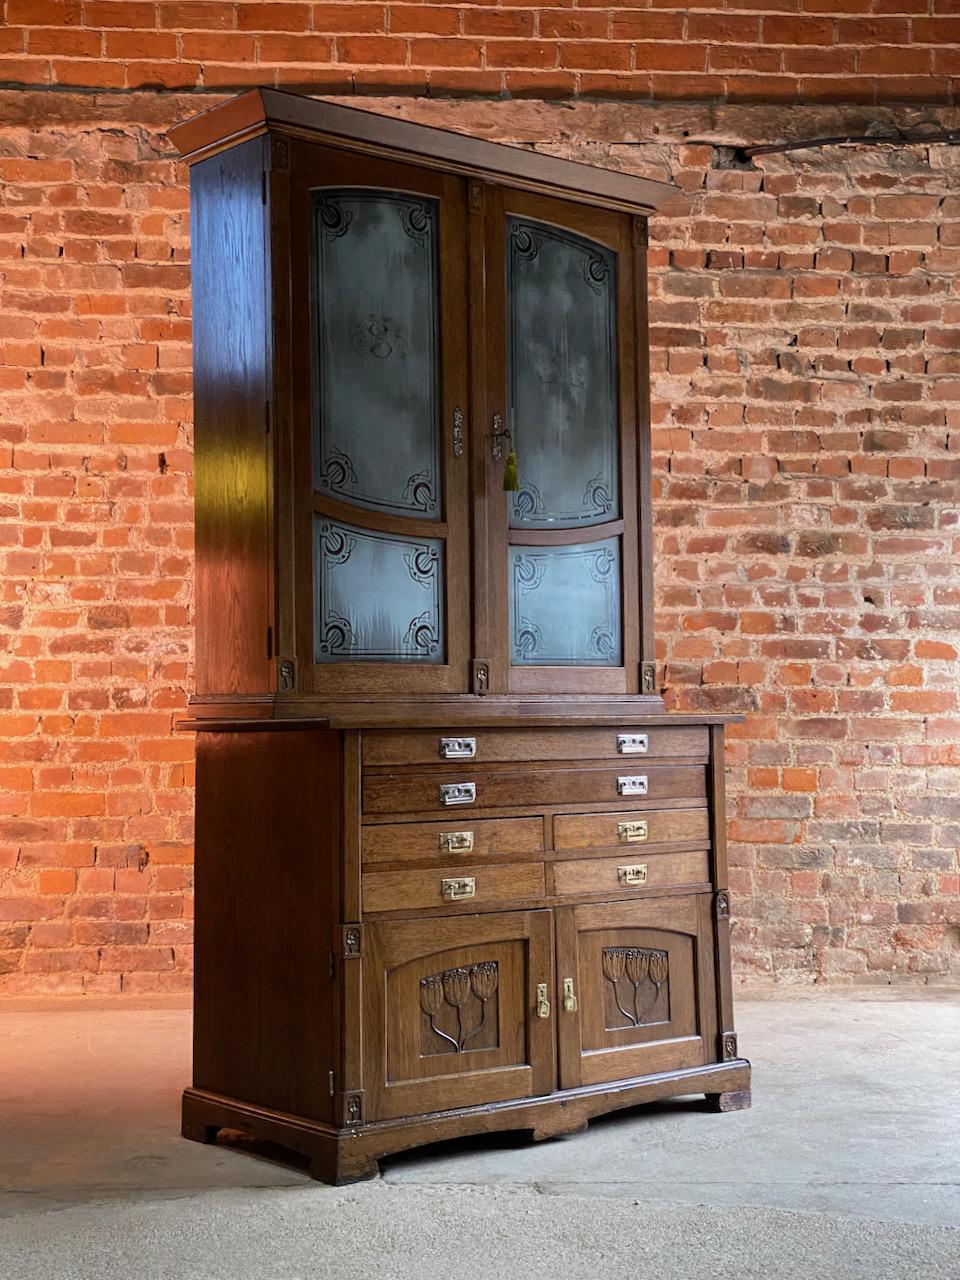 Art Nouveau Apothecary Cabinet Ukraine circa 1930s number 22

Magnificent early 20th century Ukrainian Art Nouveau apothecary oak and glass pharmacy cabinet circa 1930s, the corniced top over two etched glazed cabinet doors with Art Nouveau